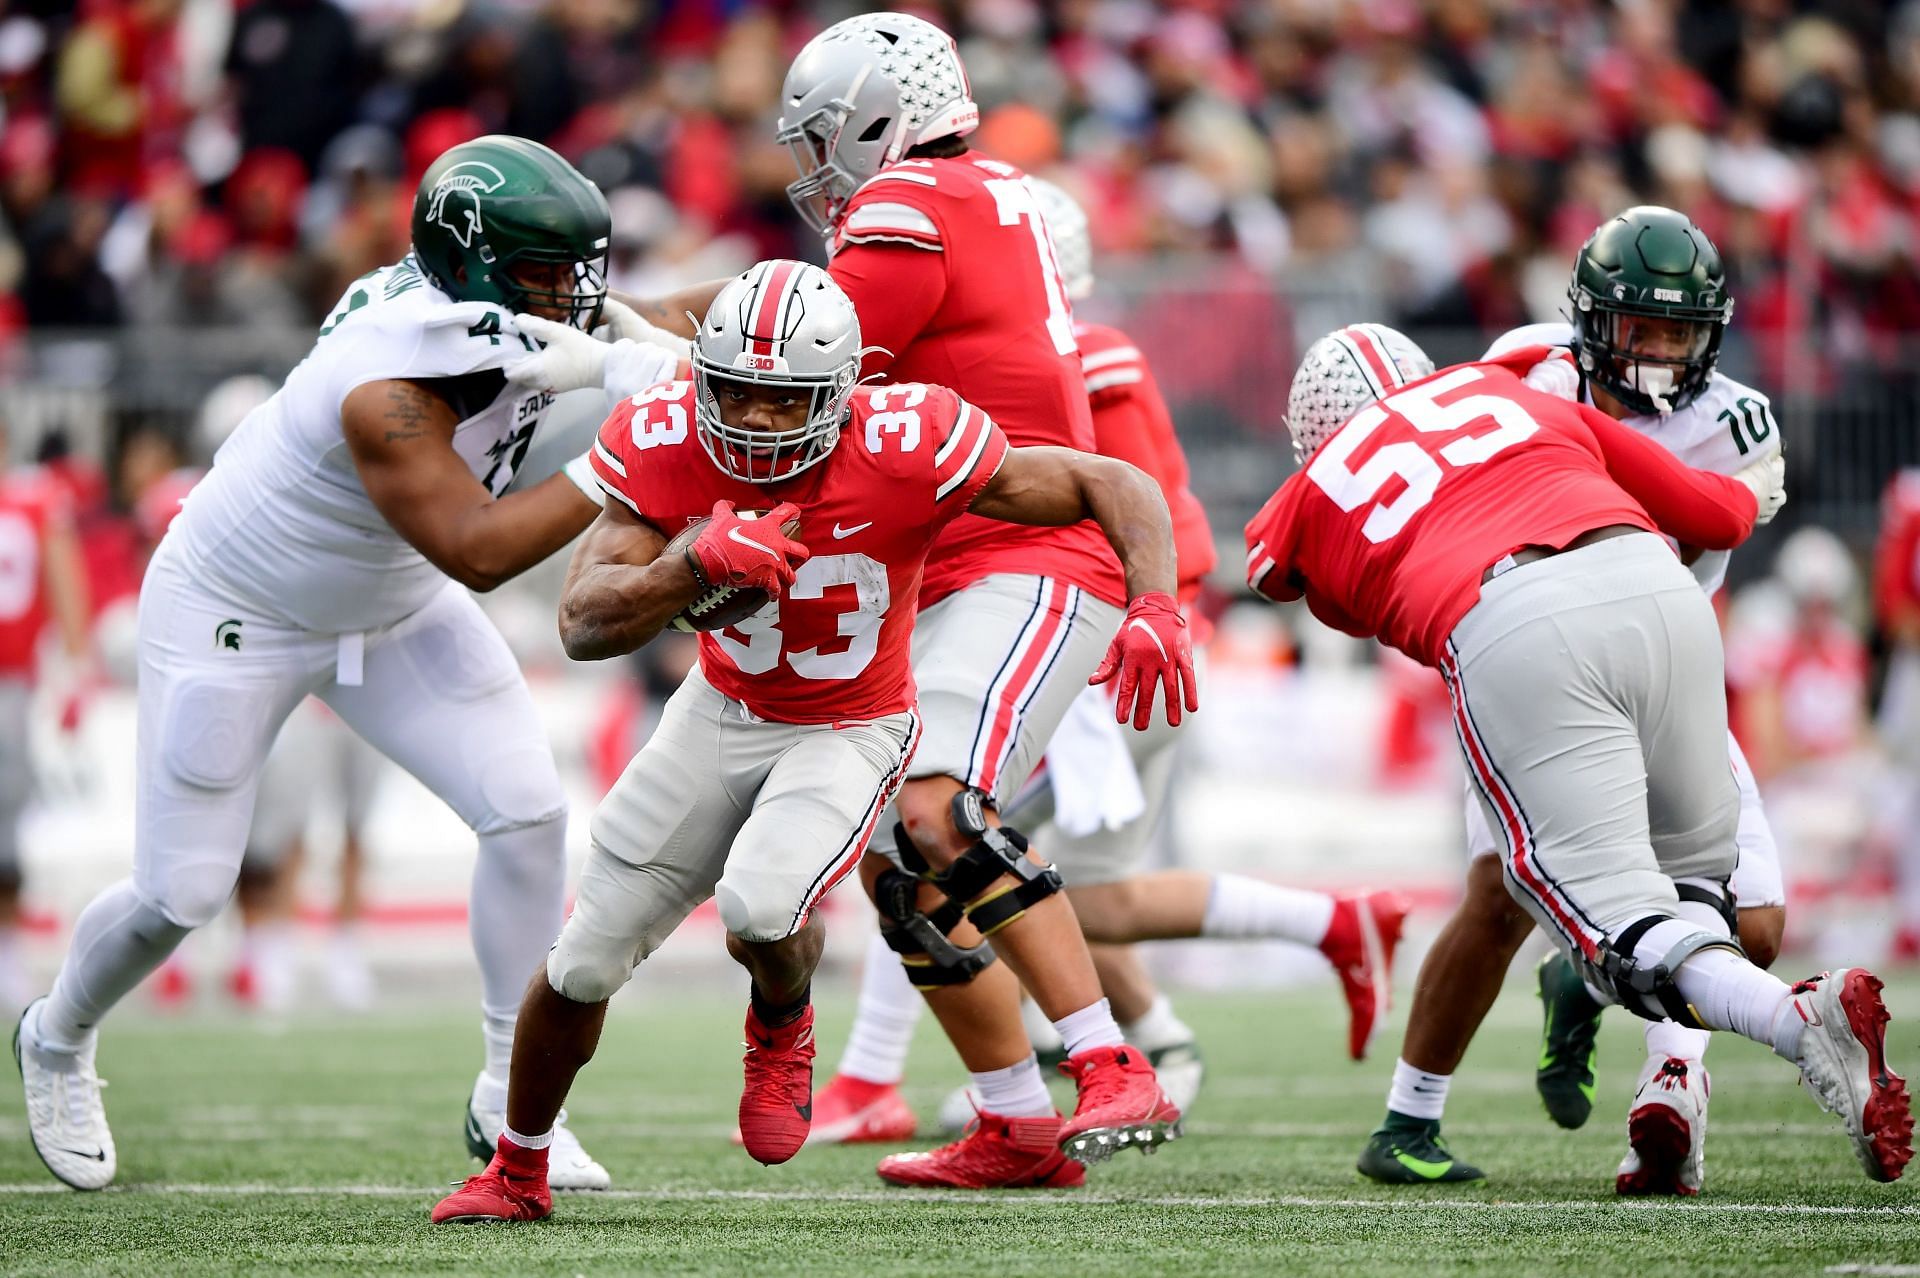 Michigan State v Ohio State was a blowout for the Buckeyes